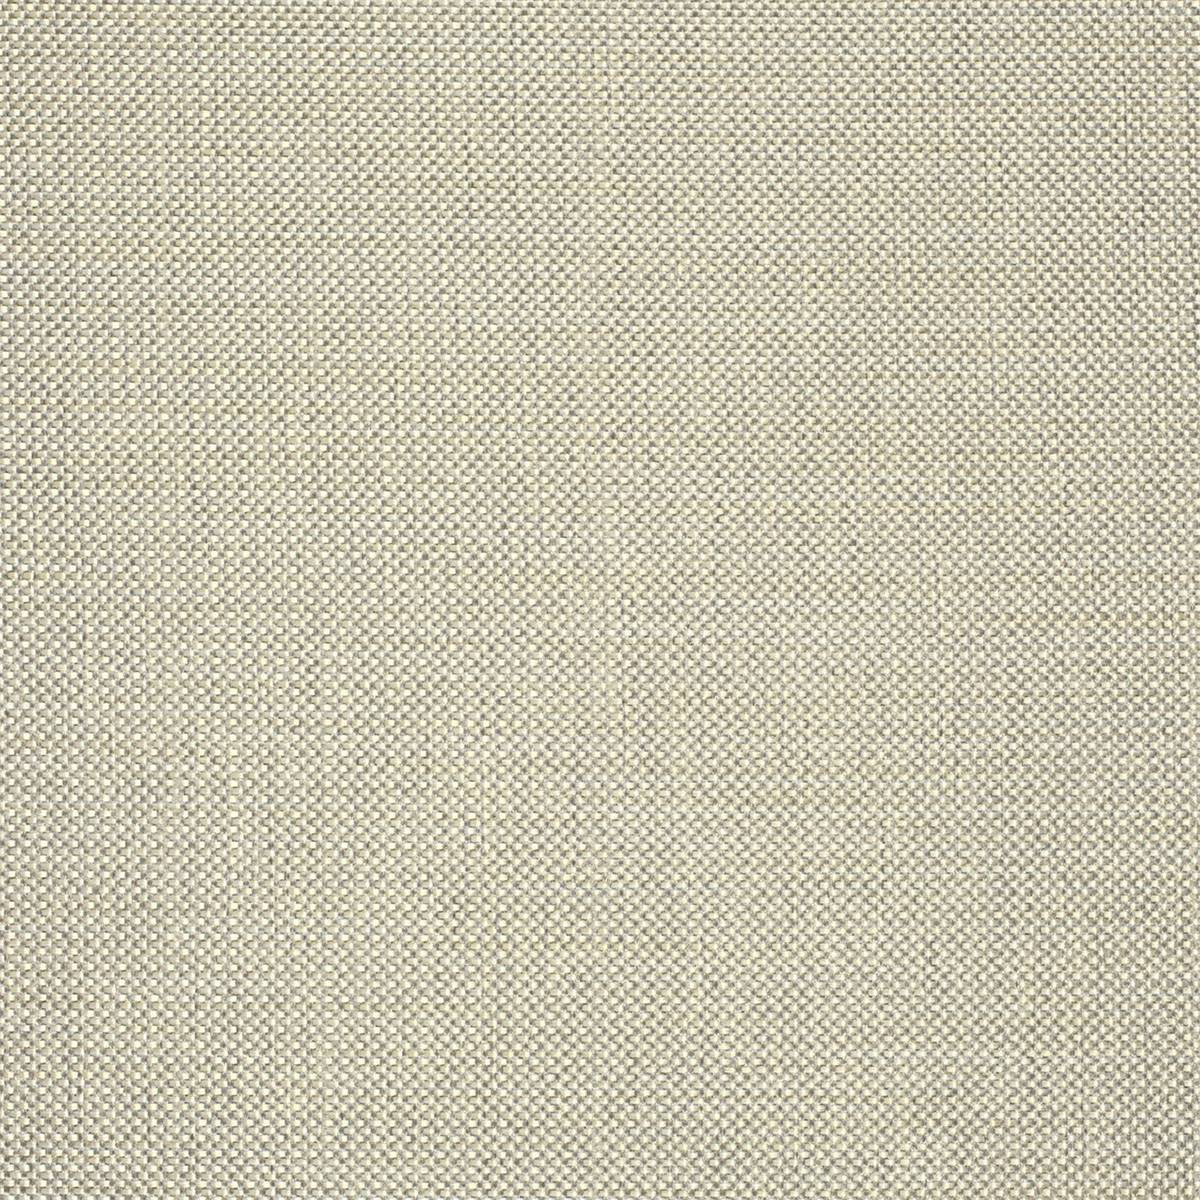 Lustre Pebble Fabric by Harlequin